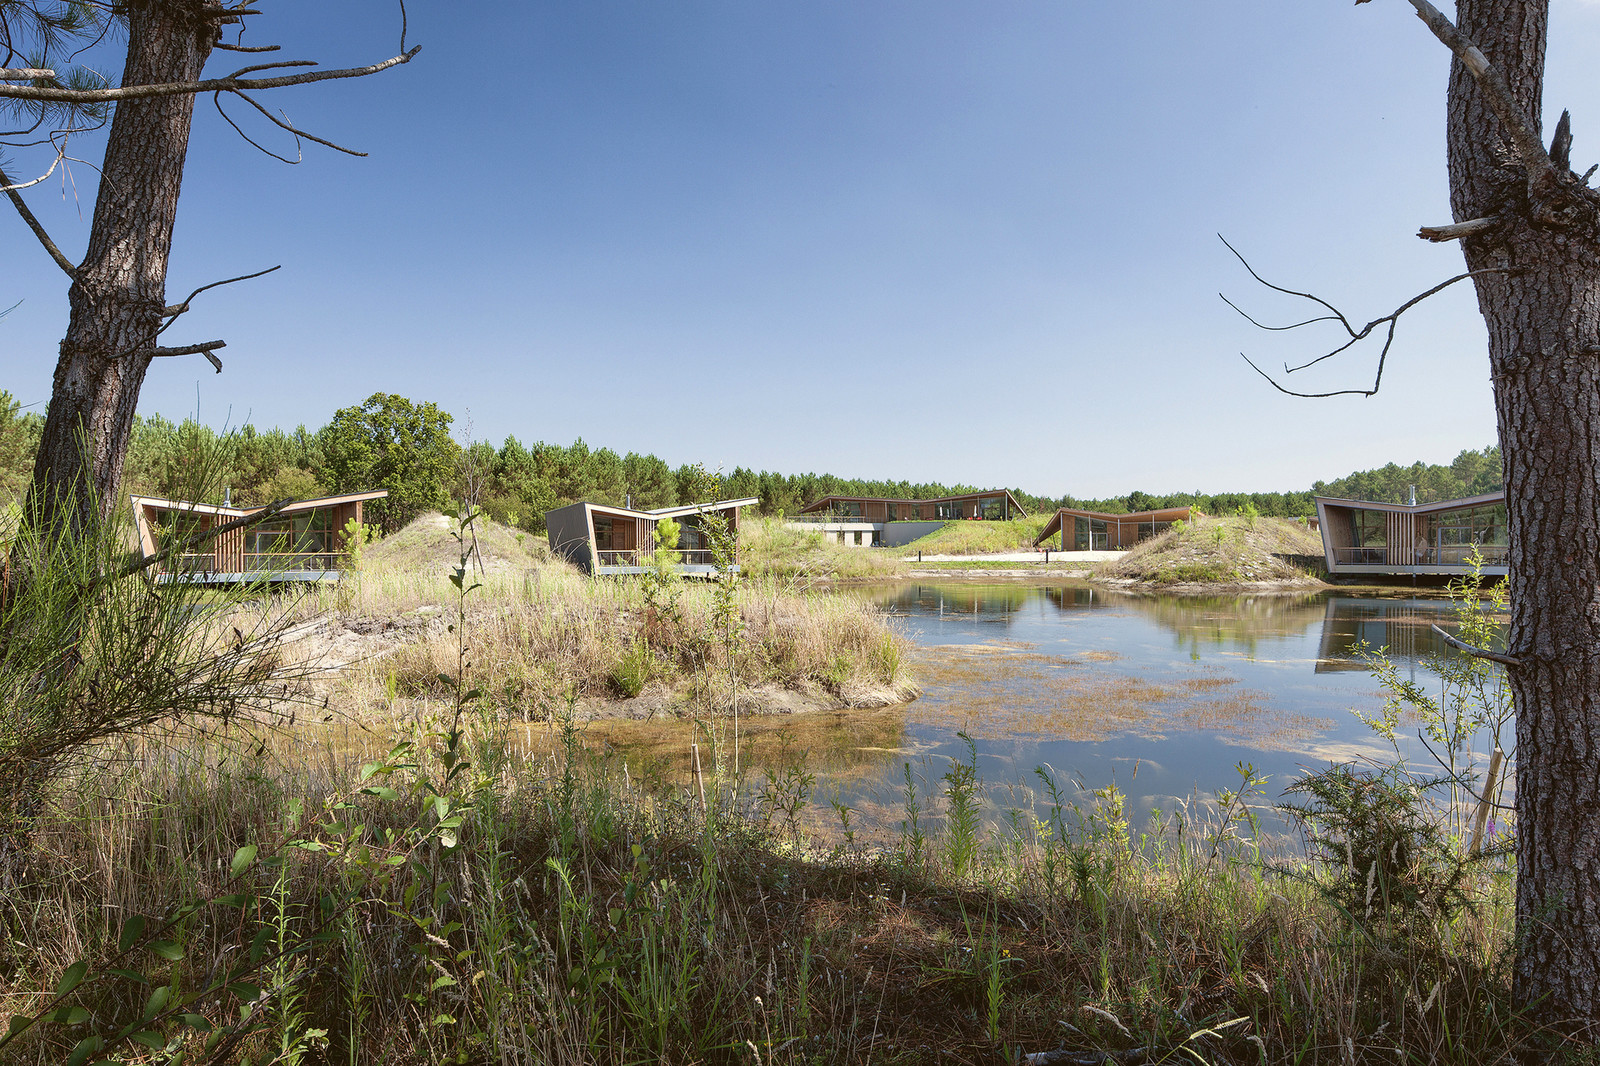 Eco Hotel Les Echasses in France